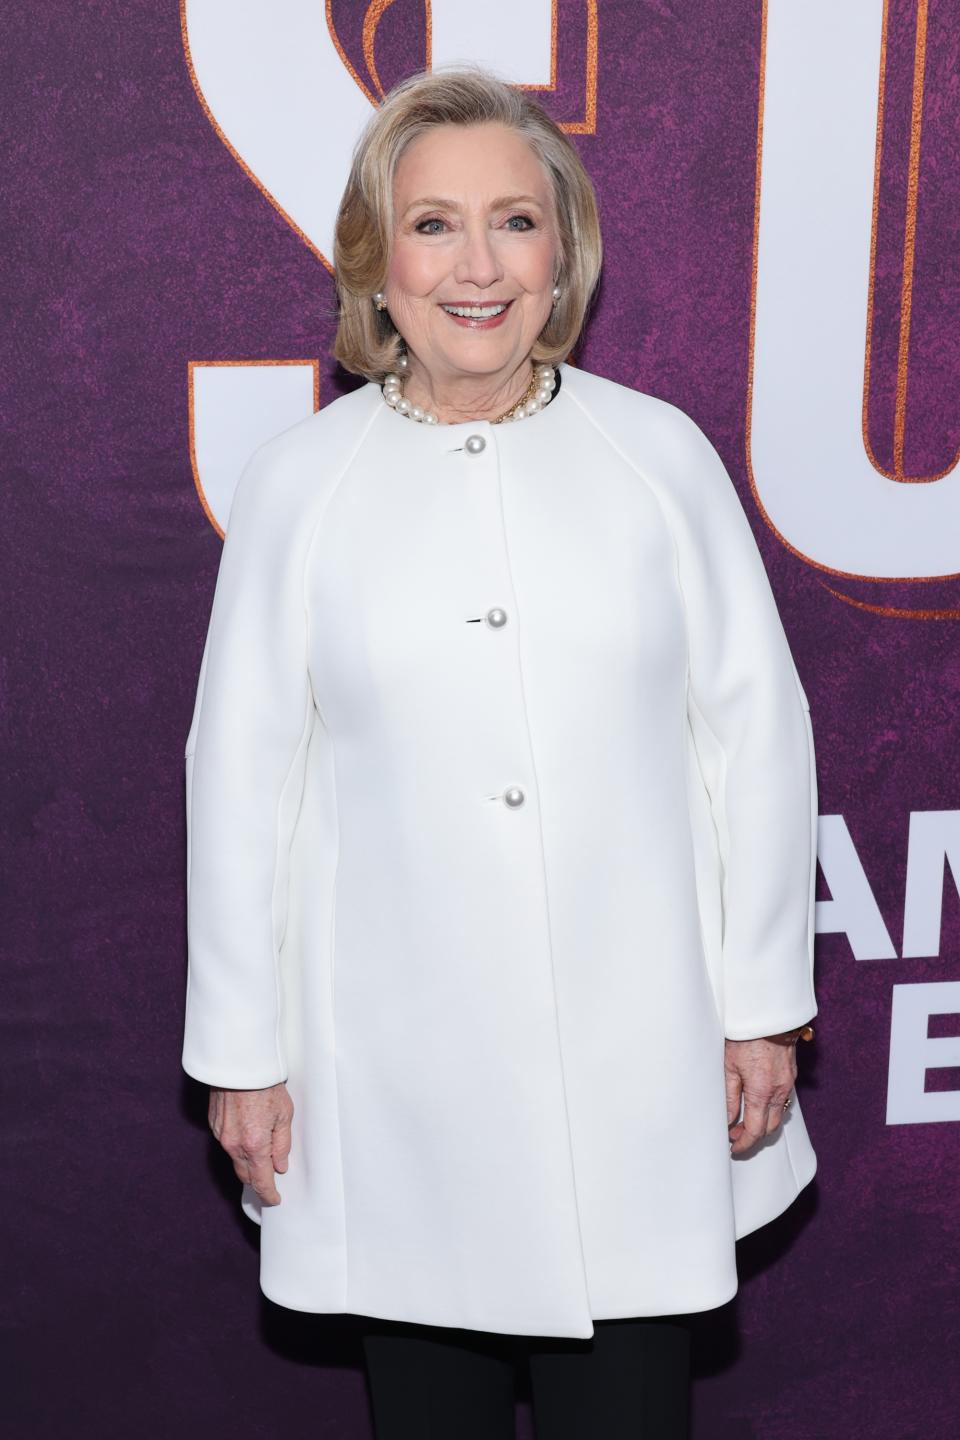 Hillary Clinton at the opening night of "Suffs" on Broadway on April 18.